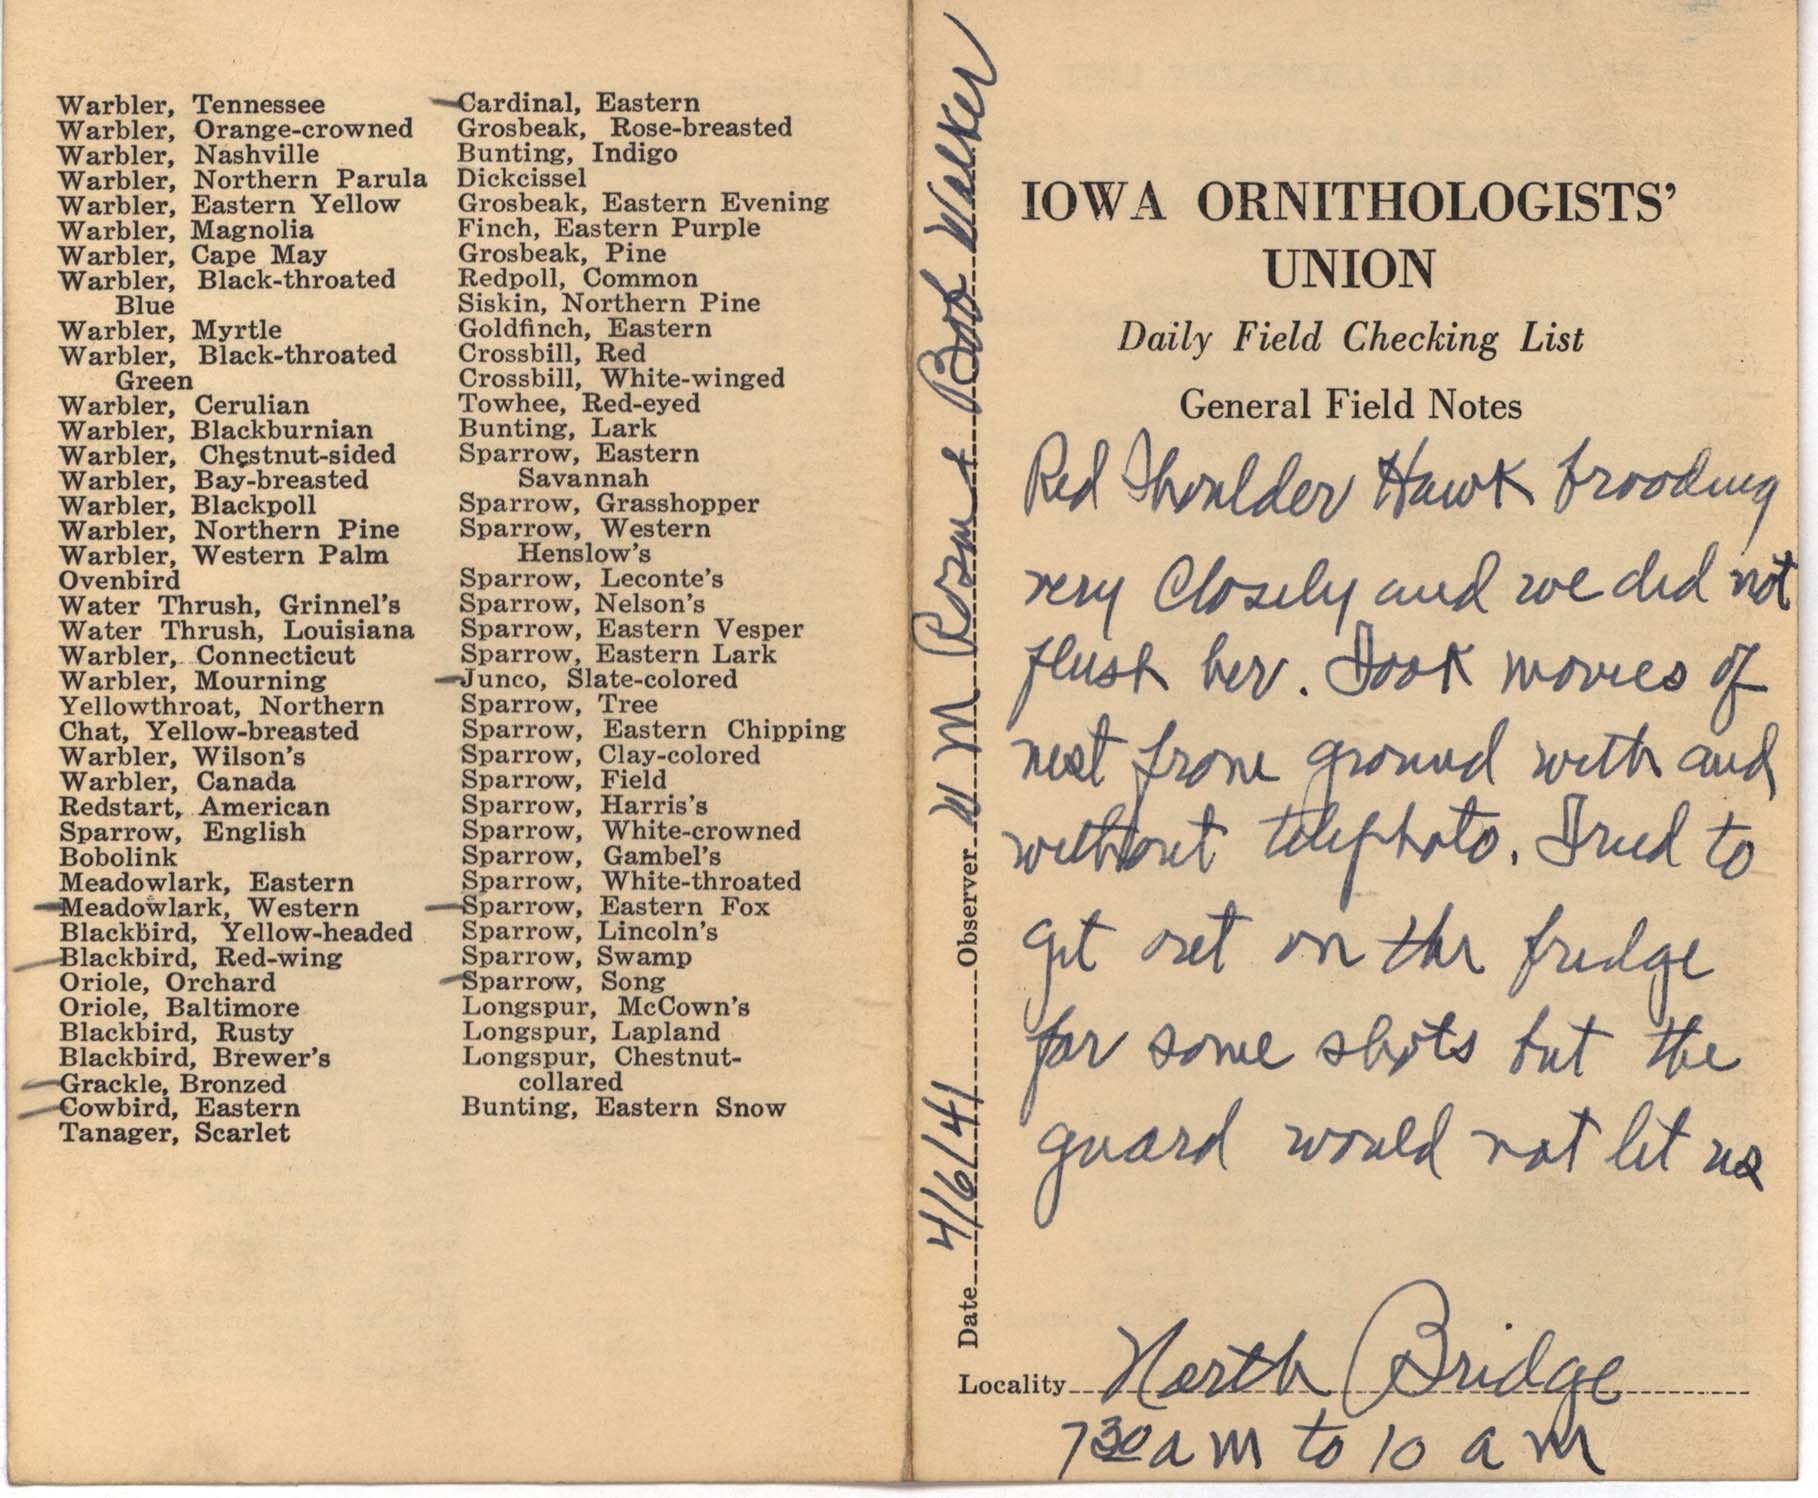 Daily field checking list by Walter Rosene, April 6, 1941